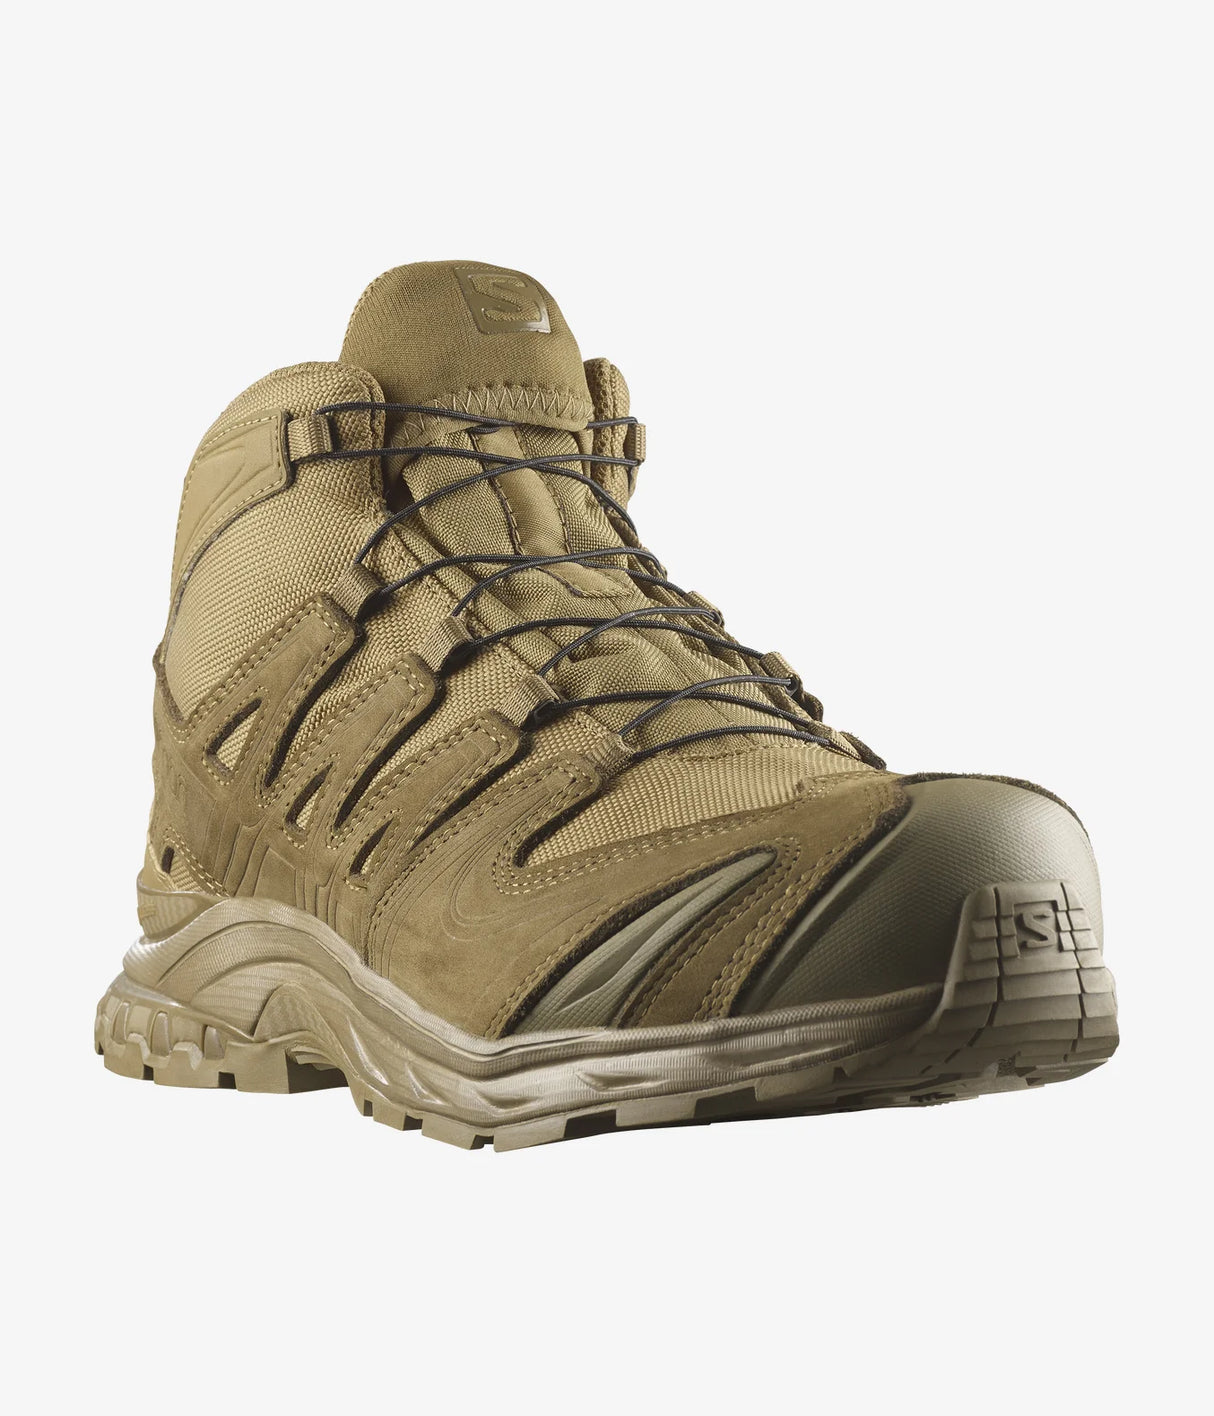 Salomon XA Forces GTX Mid: Stability and foot support for critical missions.